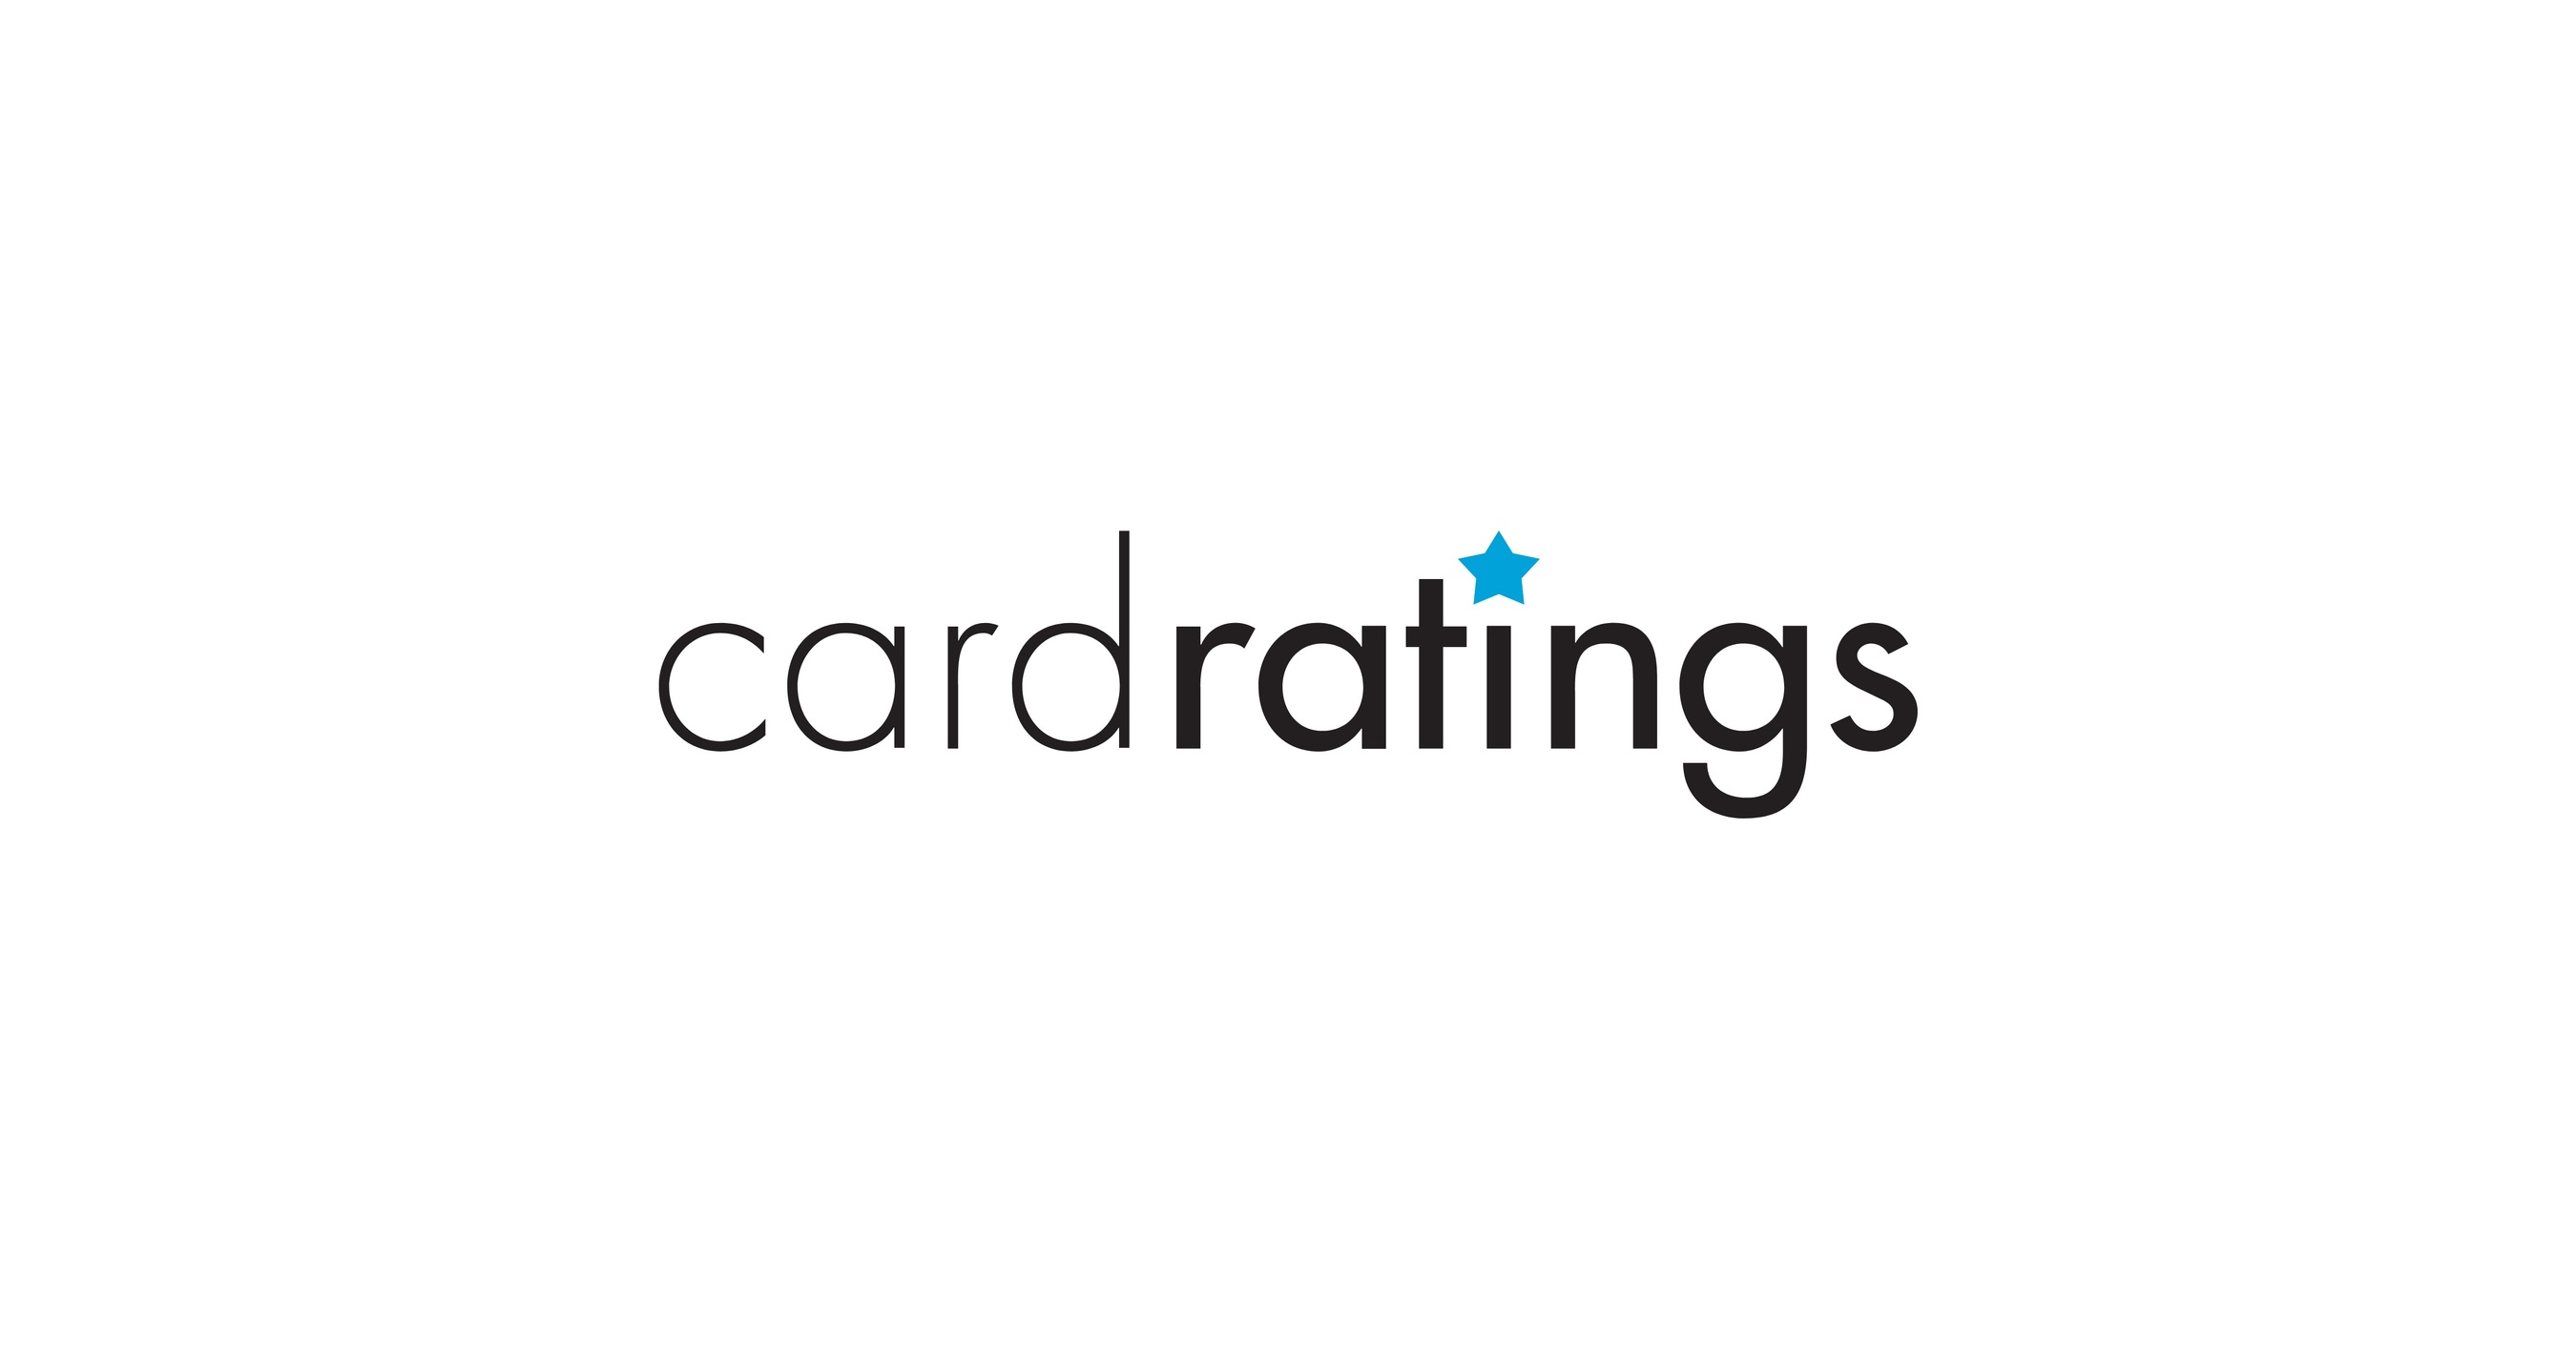 CardRatings Announces the Best Credit Cards of 2021 and Releases Its Annual Consumer Survey